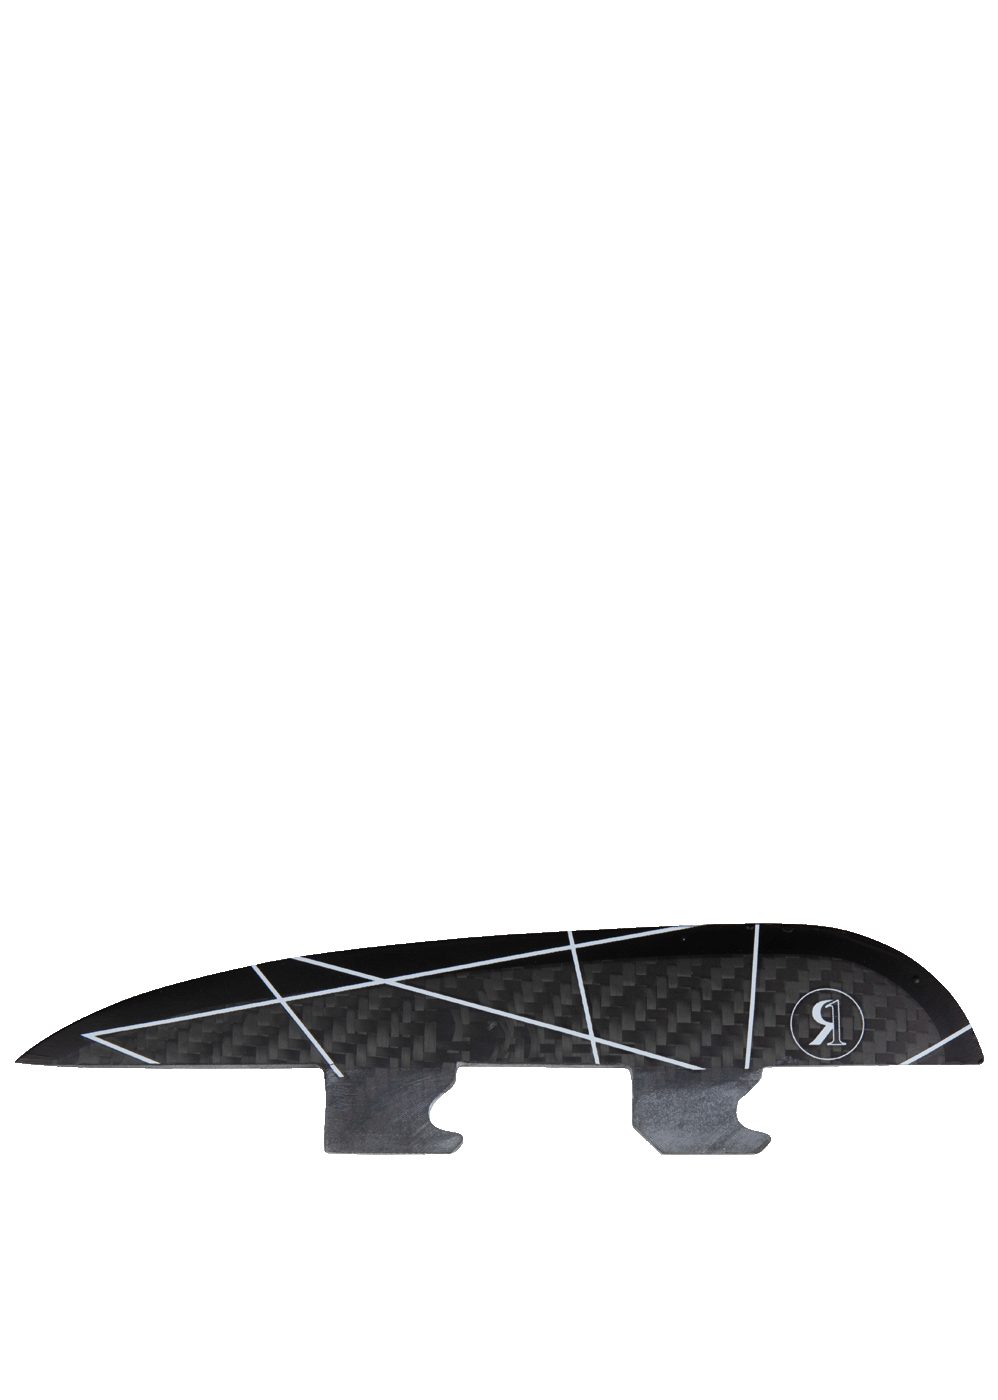 Ronix Fin-S 1.0" Floating Wakesurf Fin | Sale! (Graphic Change)